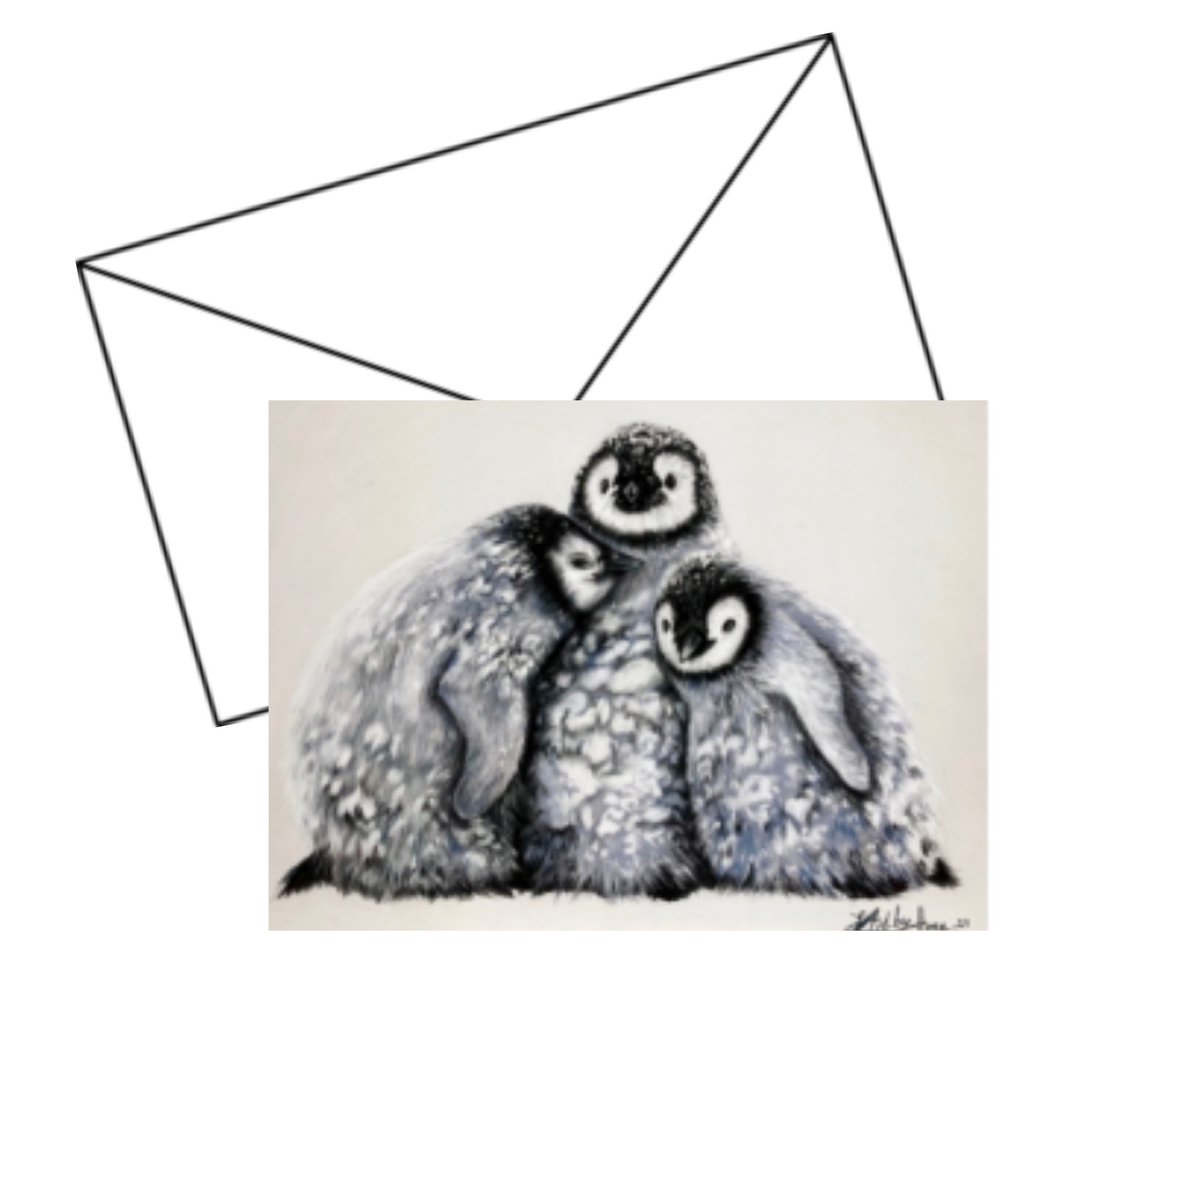 Apparently its #penguinawarenessday so how about getting one of these free by using code 3FOR2CARDS over at artbythree.co.uk/cards #mhhsbd #penguins #FridayVibes #cards #htlmphour #animals #smallbusiness #weallsendcards #smallbusinessowners